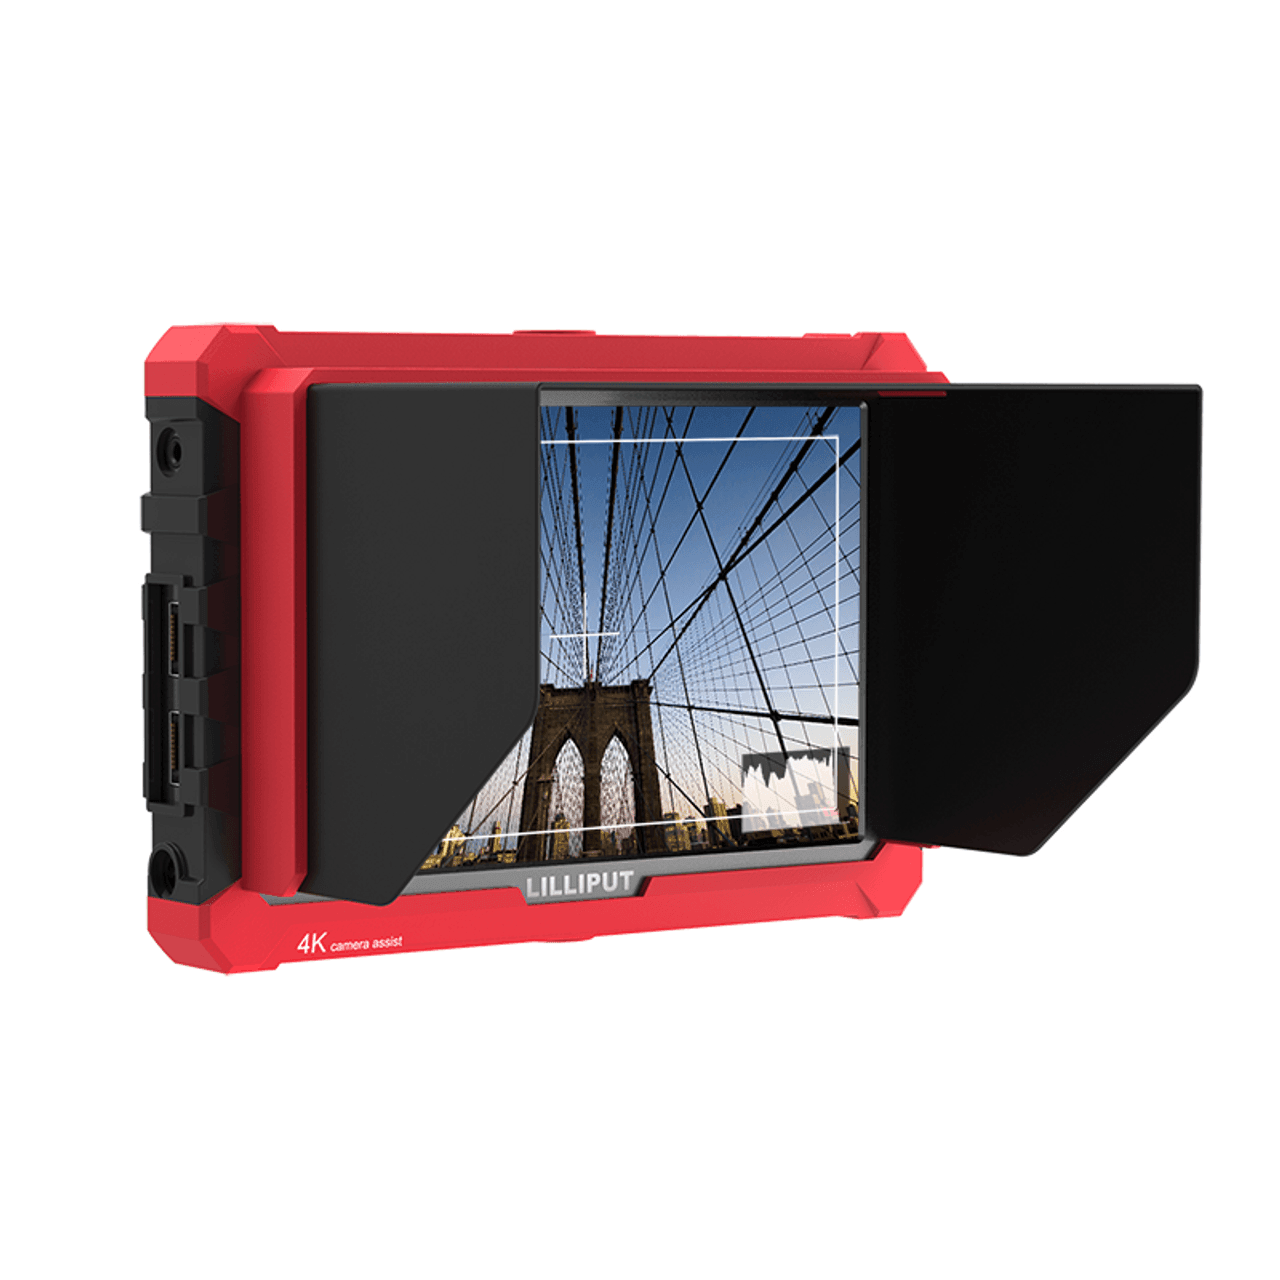 Lilliput A7S 7 Inch Full HD Monitor with 4K Camera Assist